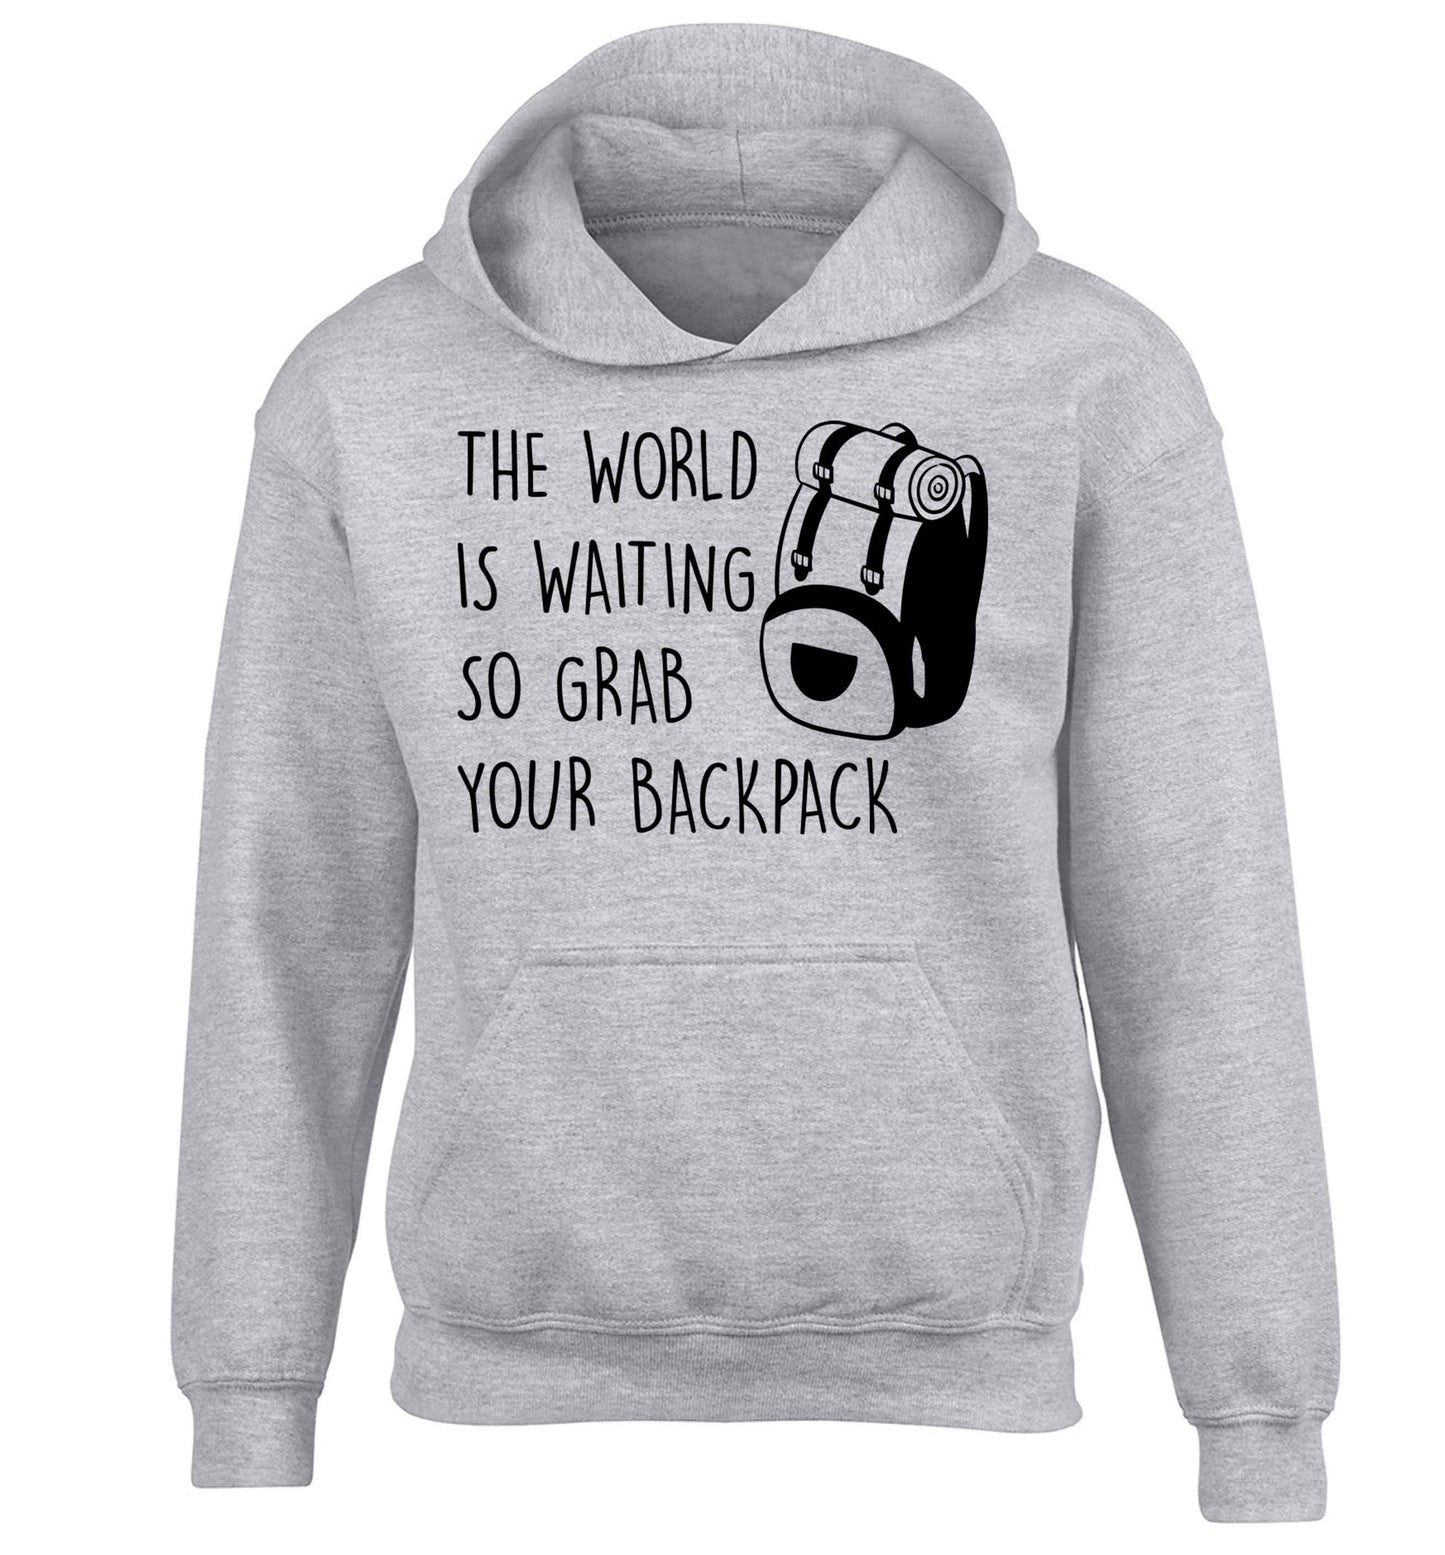 The world is waiting so grab your backpack children's grey hoodie 12-13 Years